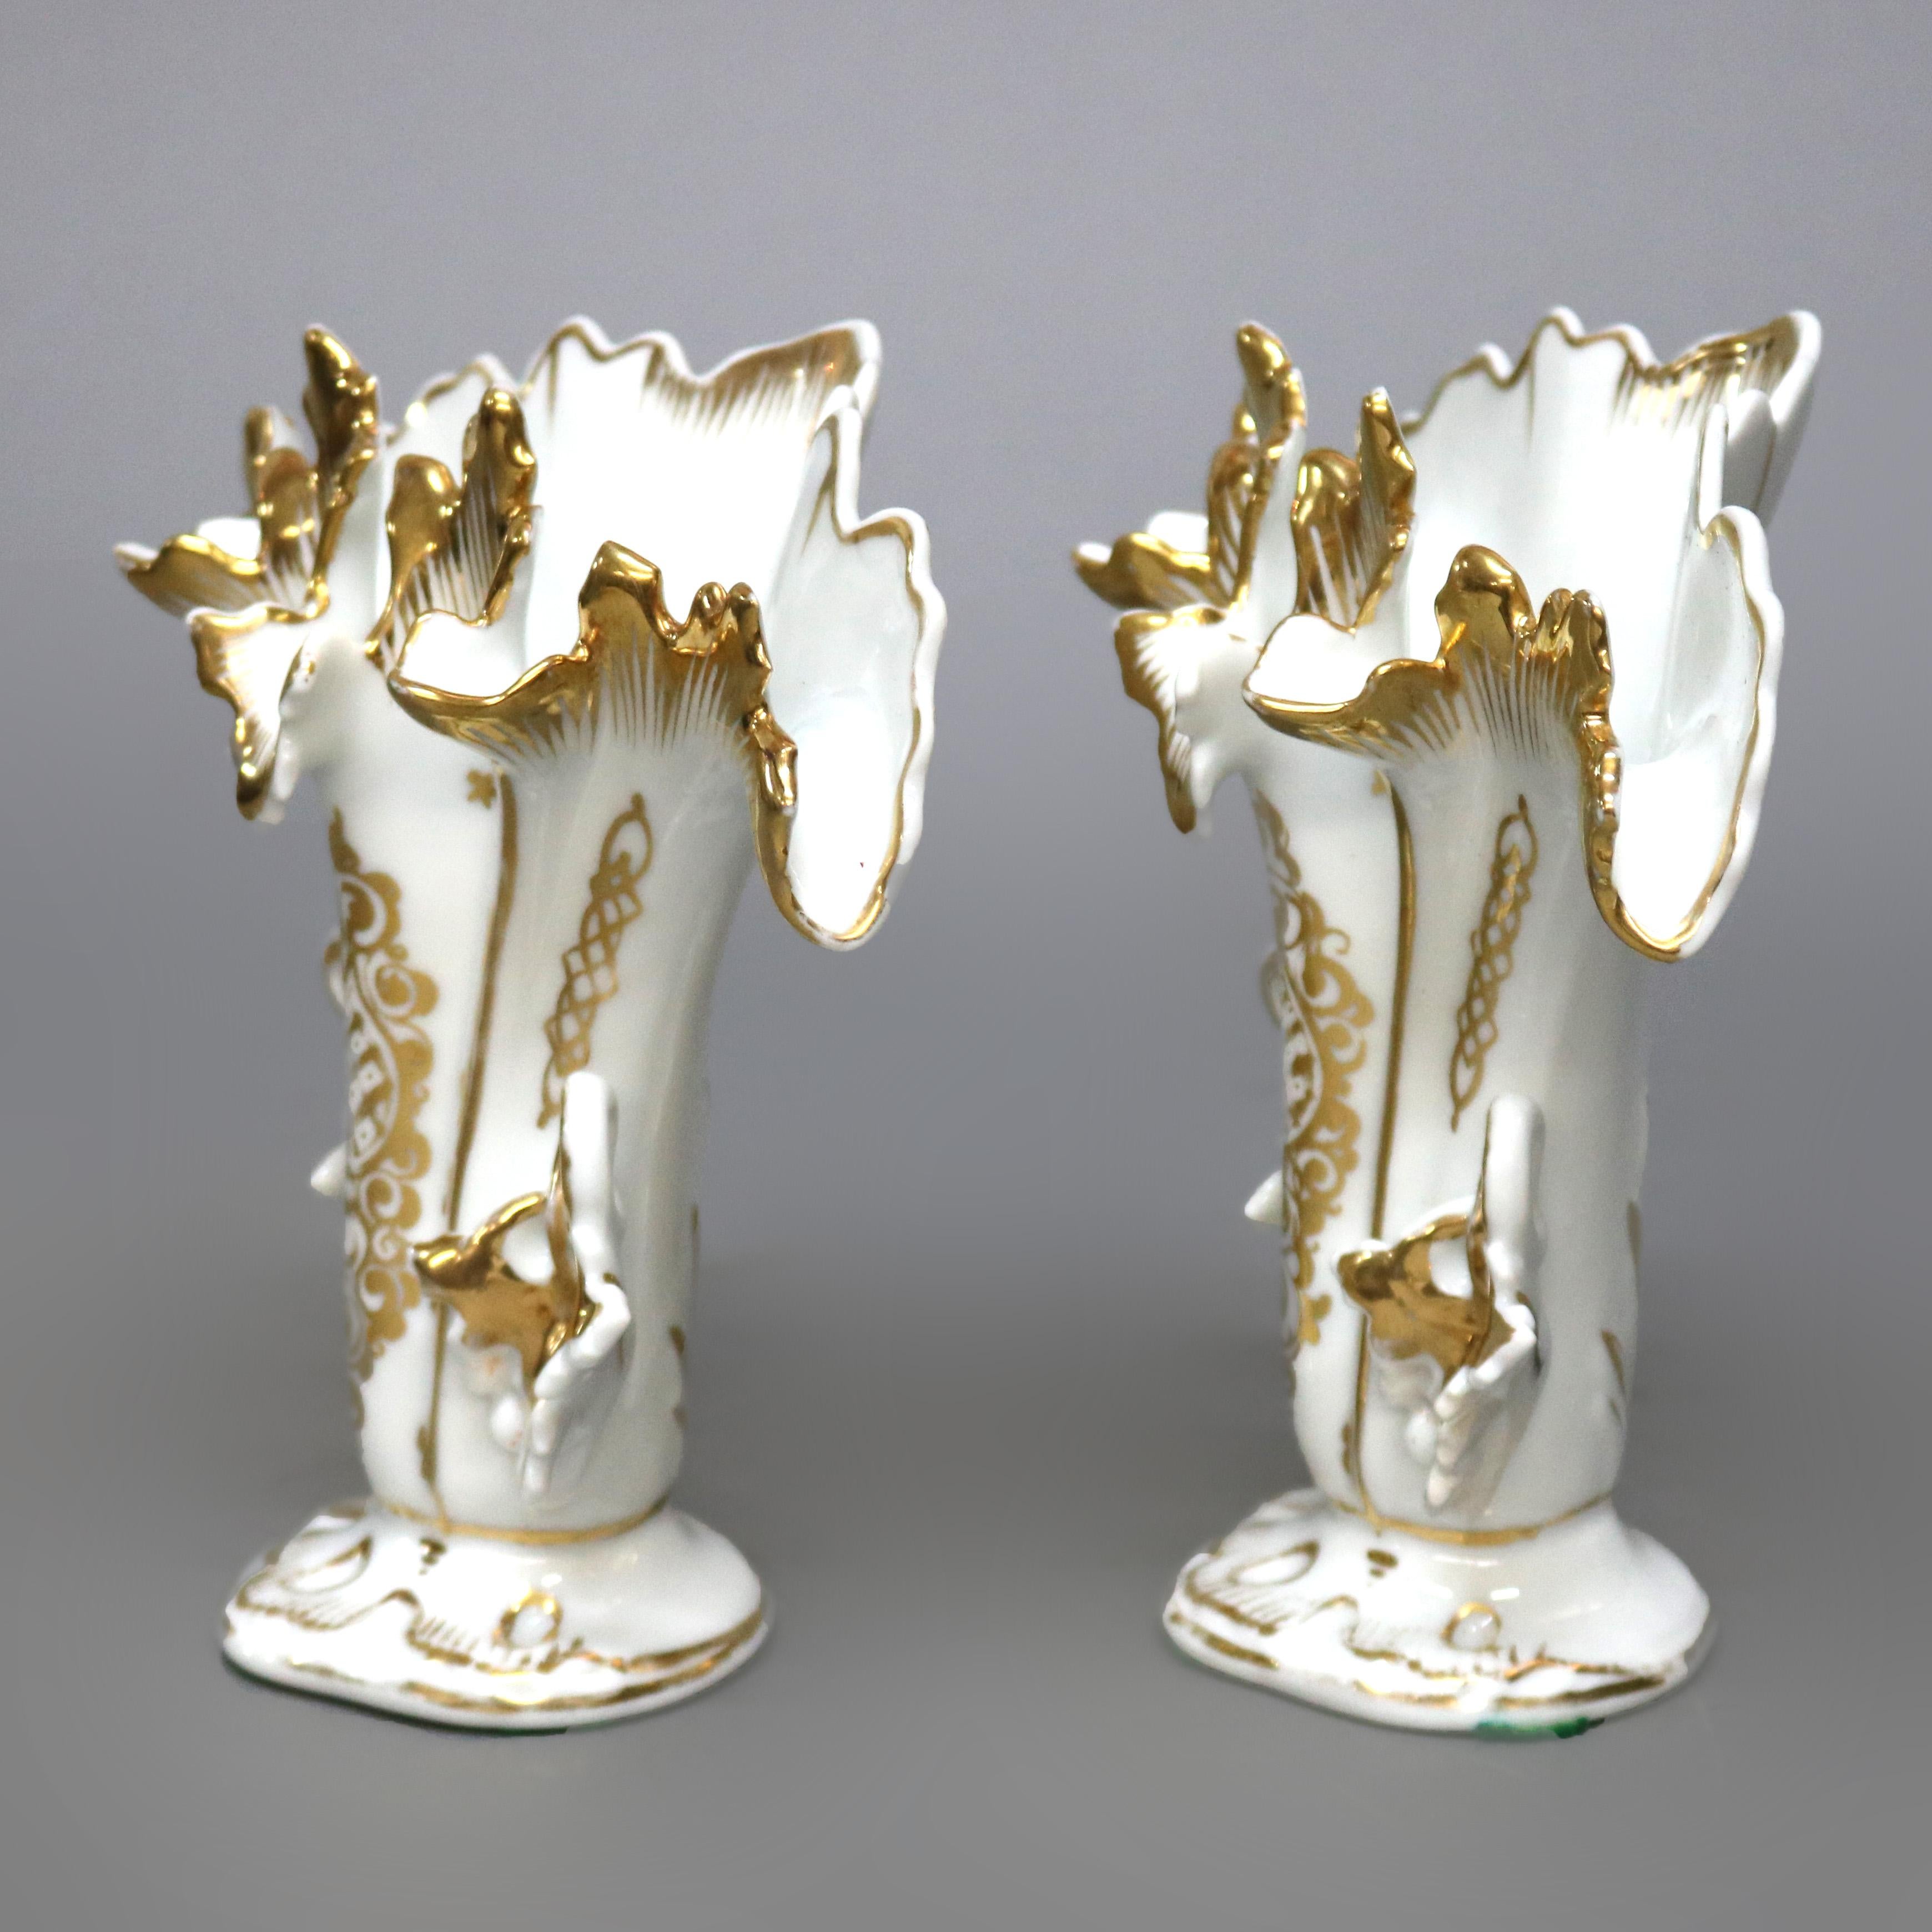 Victorian Antique Pair of French Old Paris Porcelain Gilt Decorated Spill Vases circa 1880